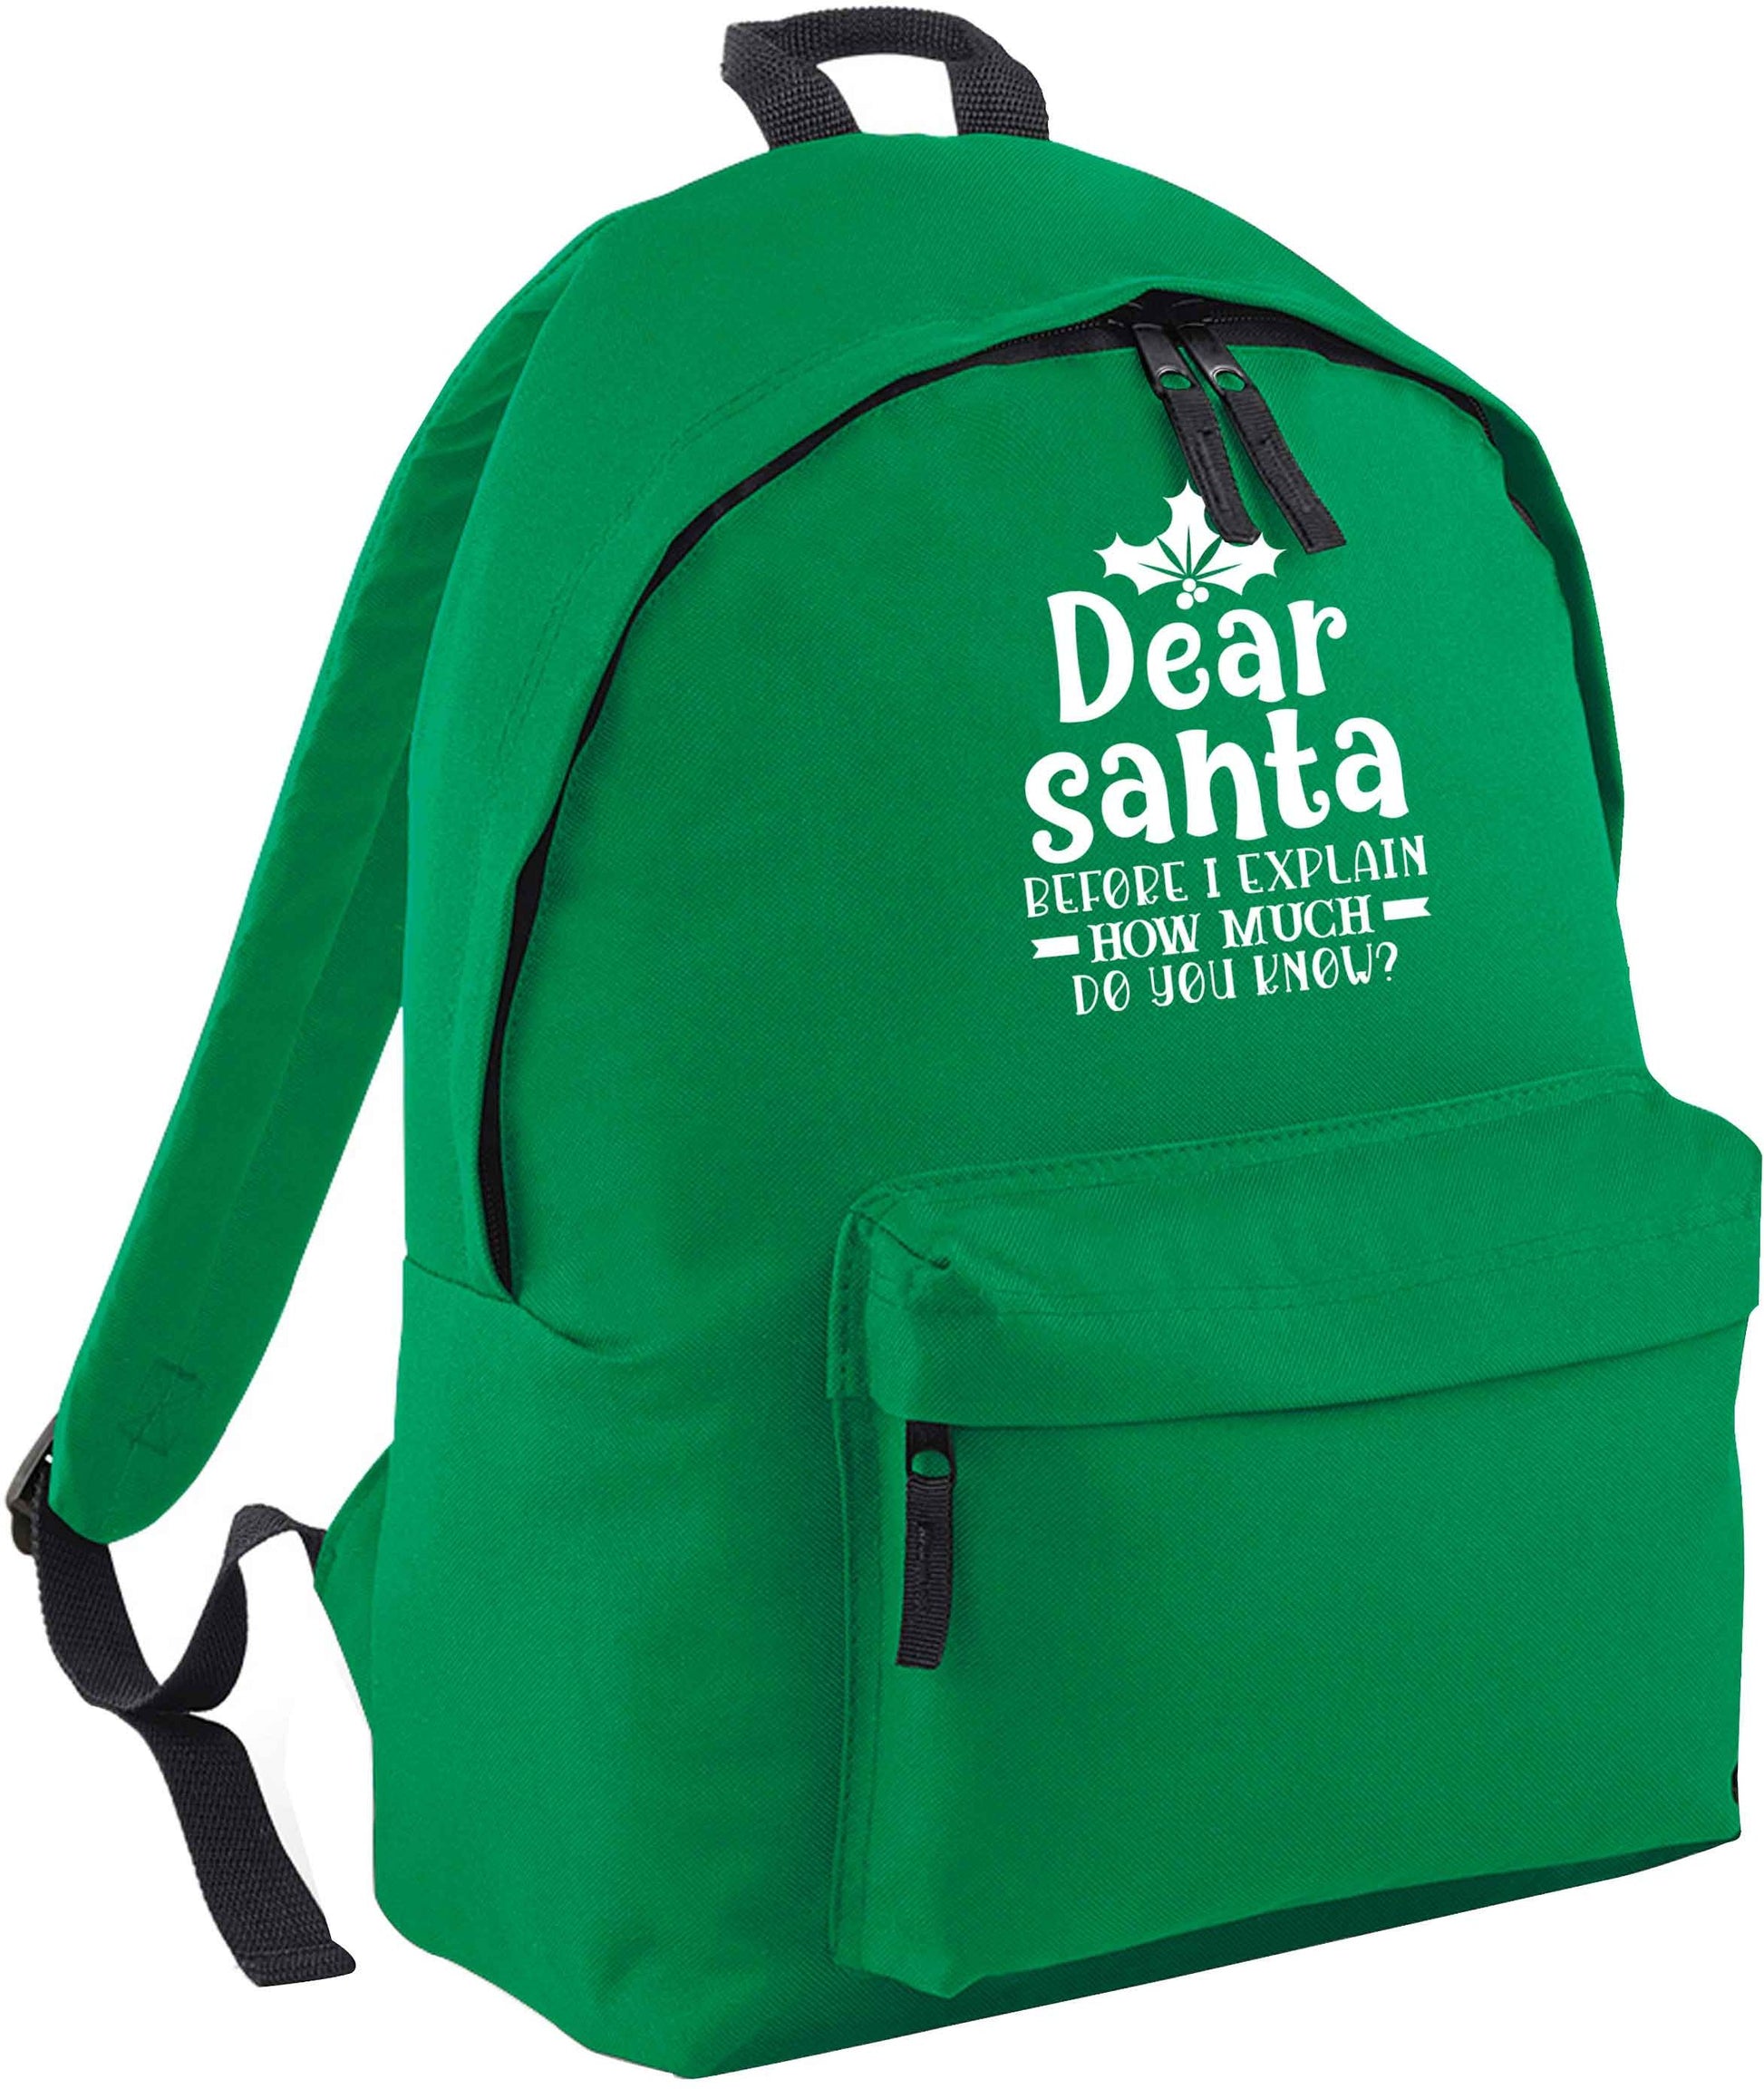 Santa before I explain how much do you know? green adults backpack